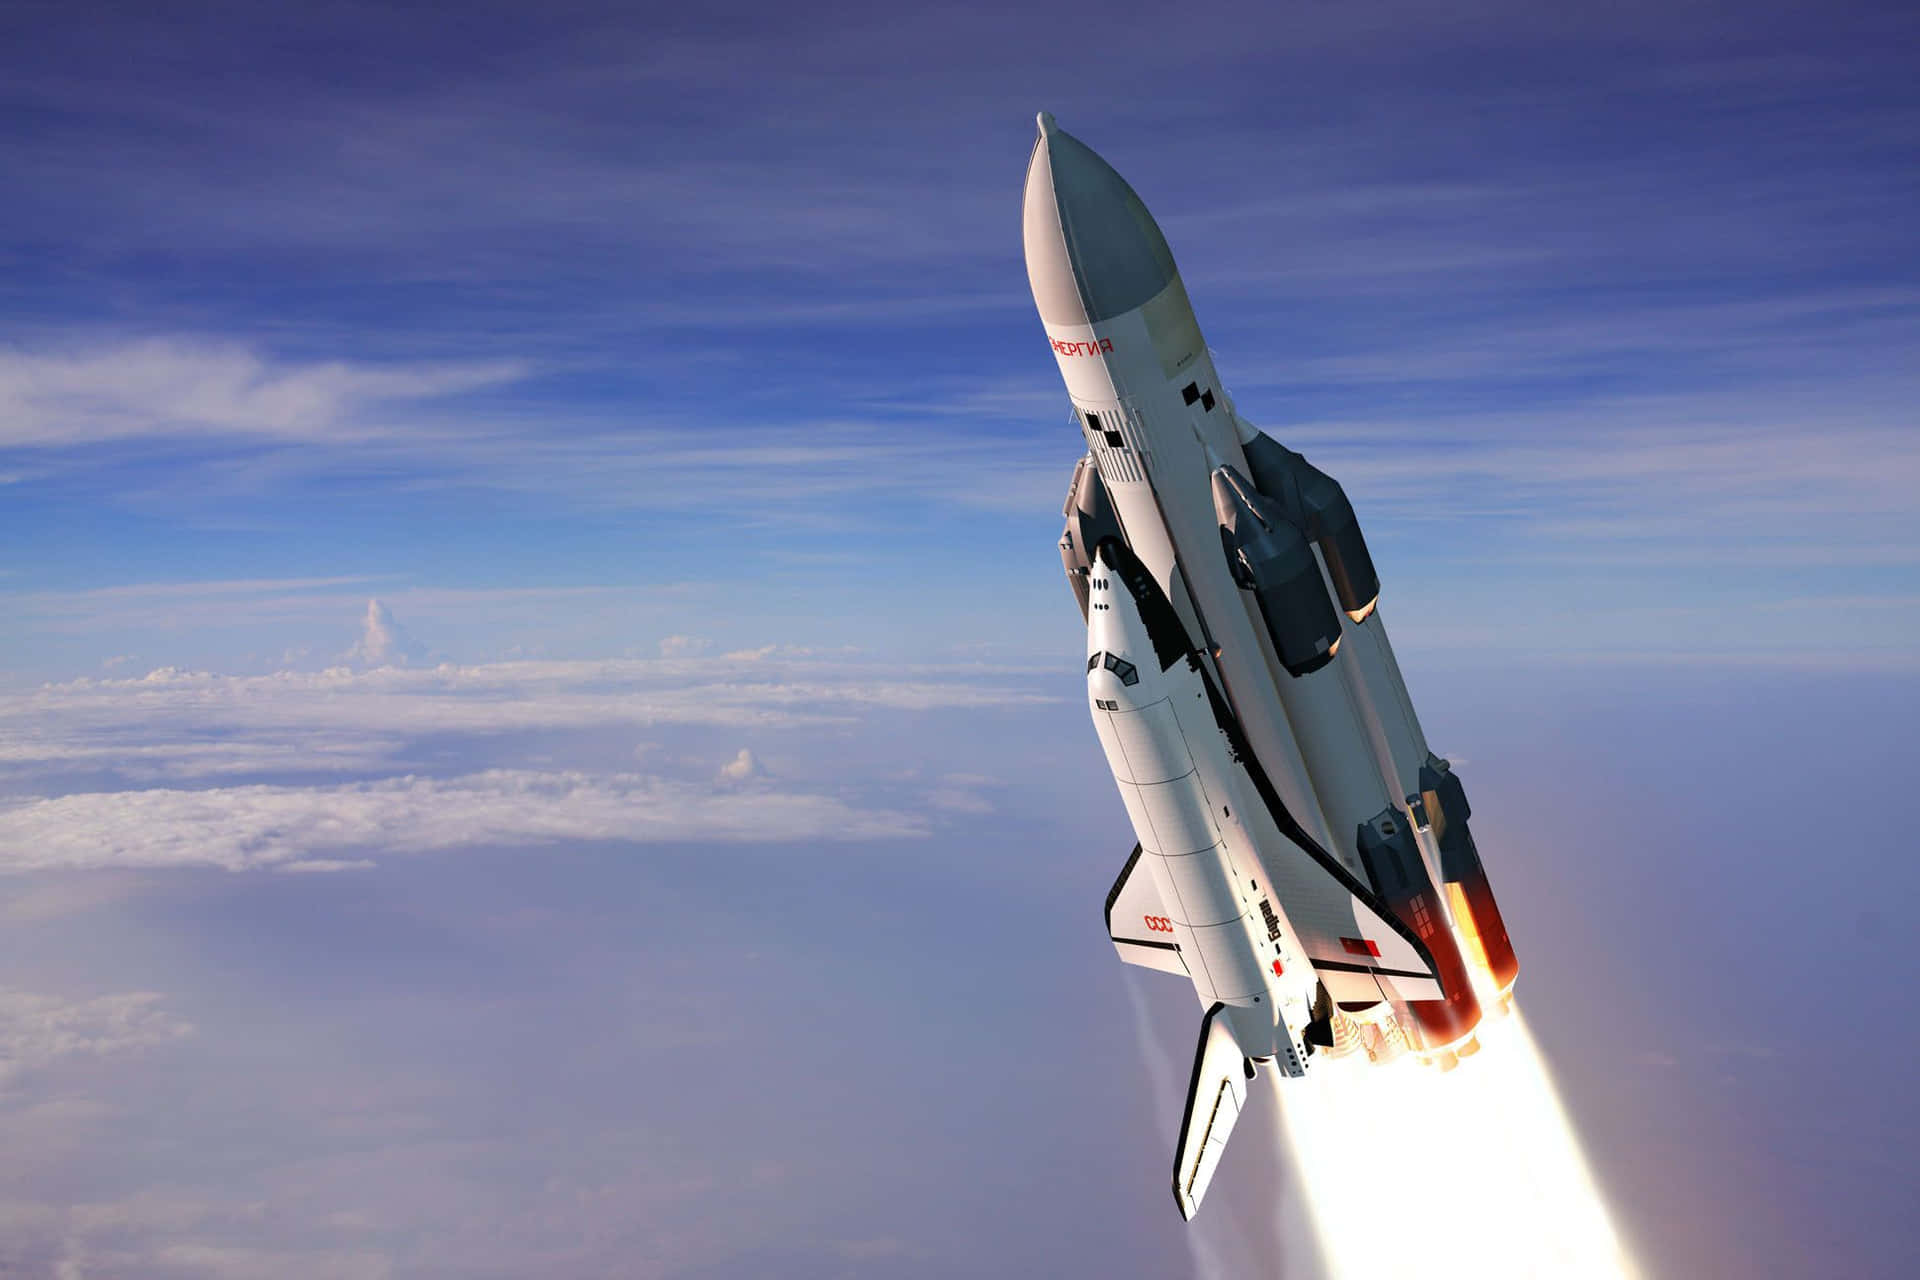 "The Awesome Space Shuttle" Wallpaper